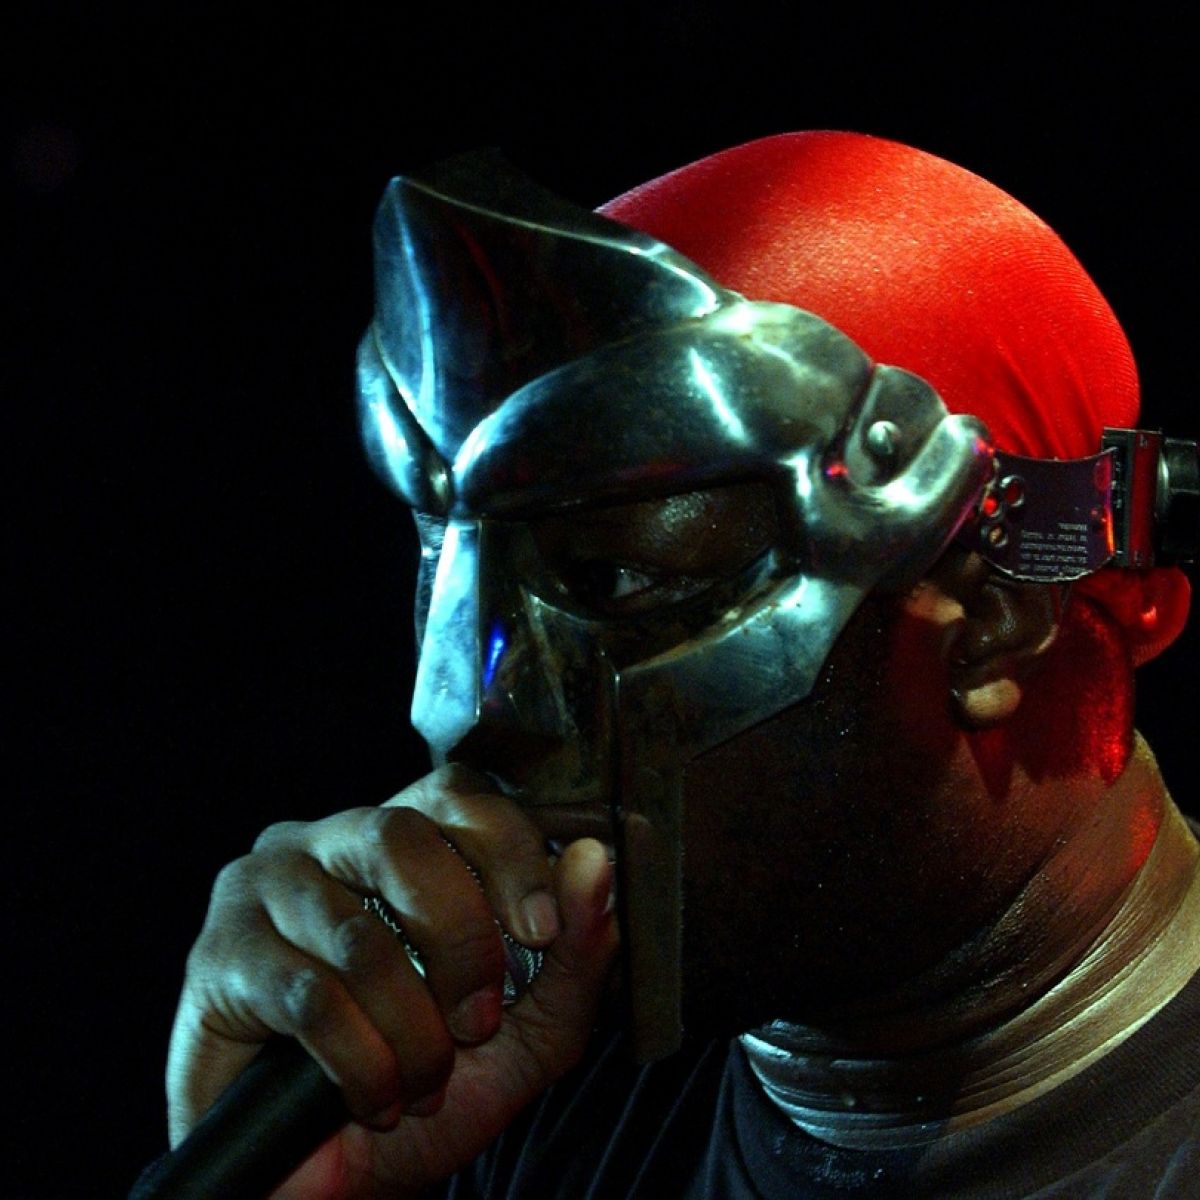 Picture of MF DOOM. (Photo by Keith Bedford)